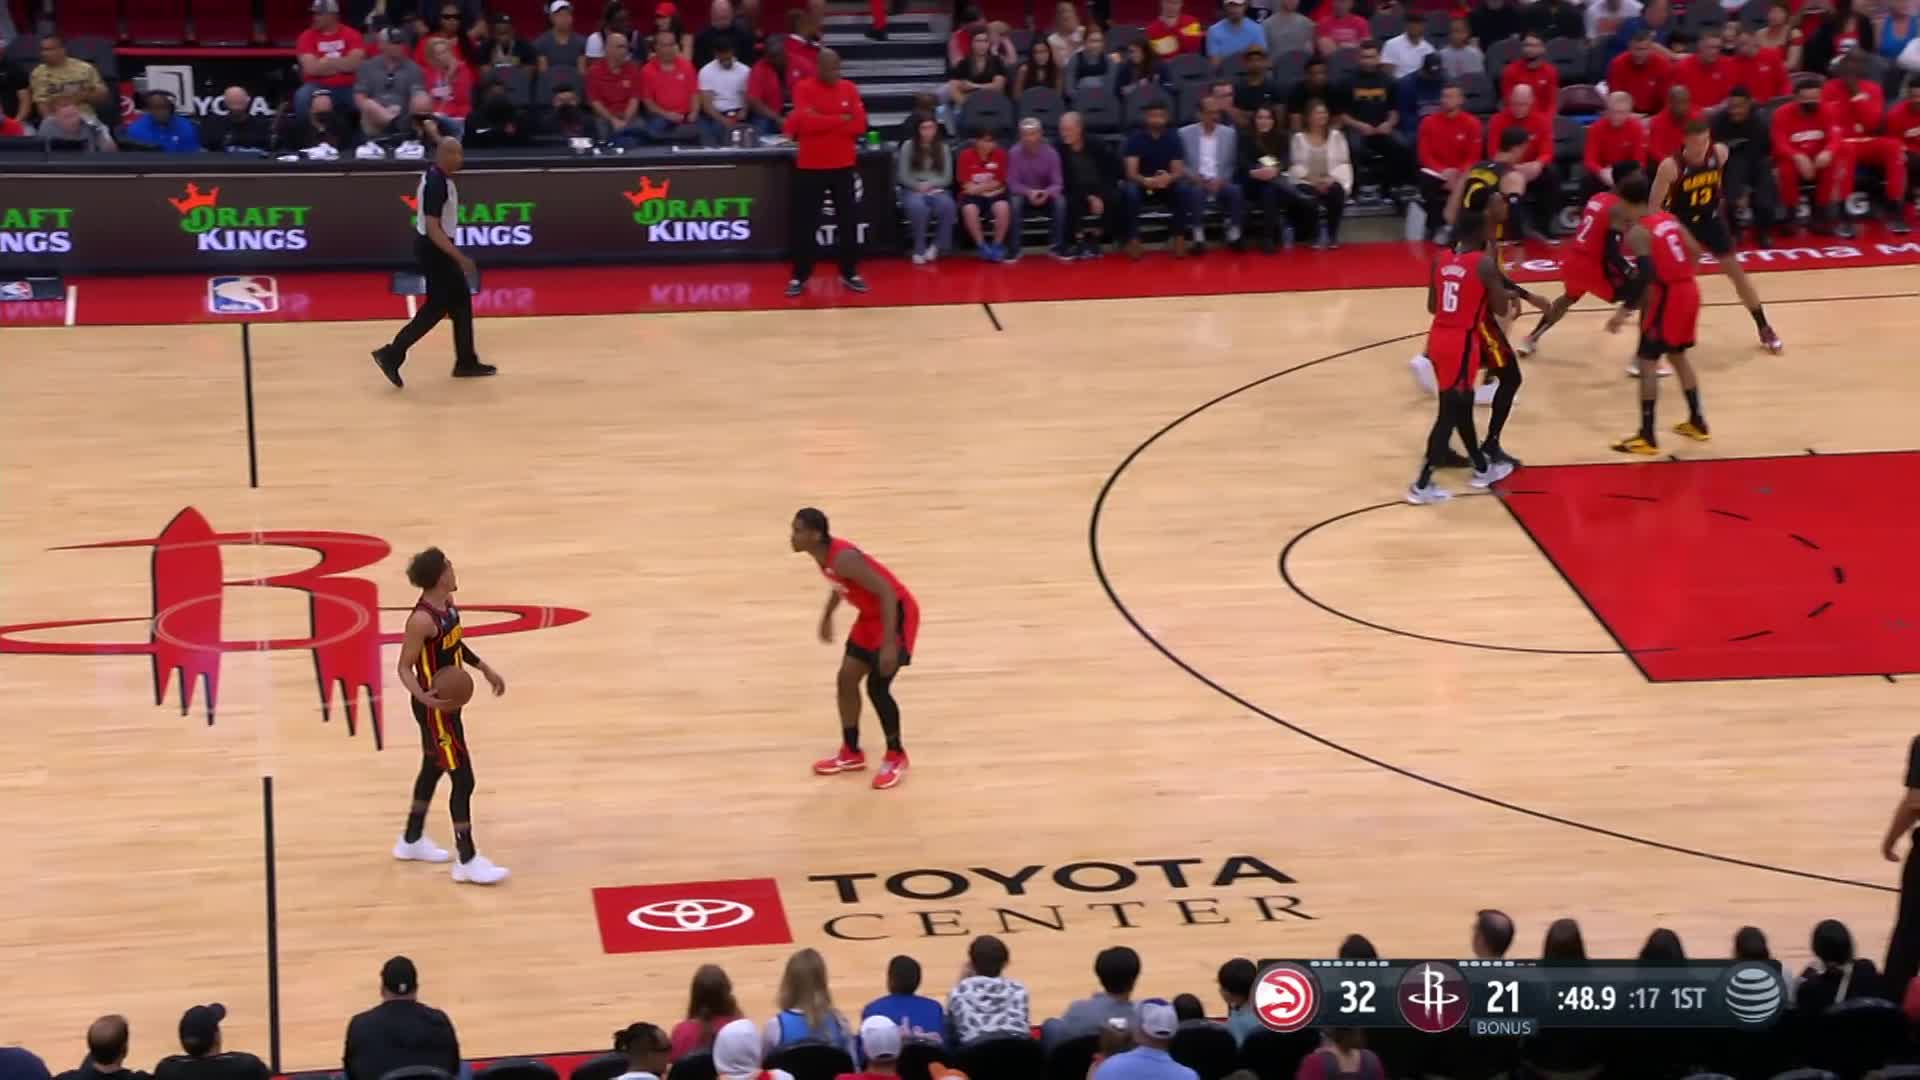 Nwaba Throws it Down